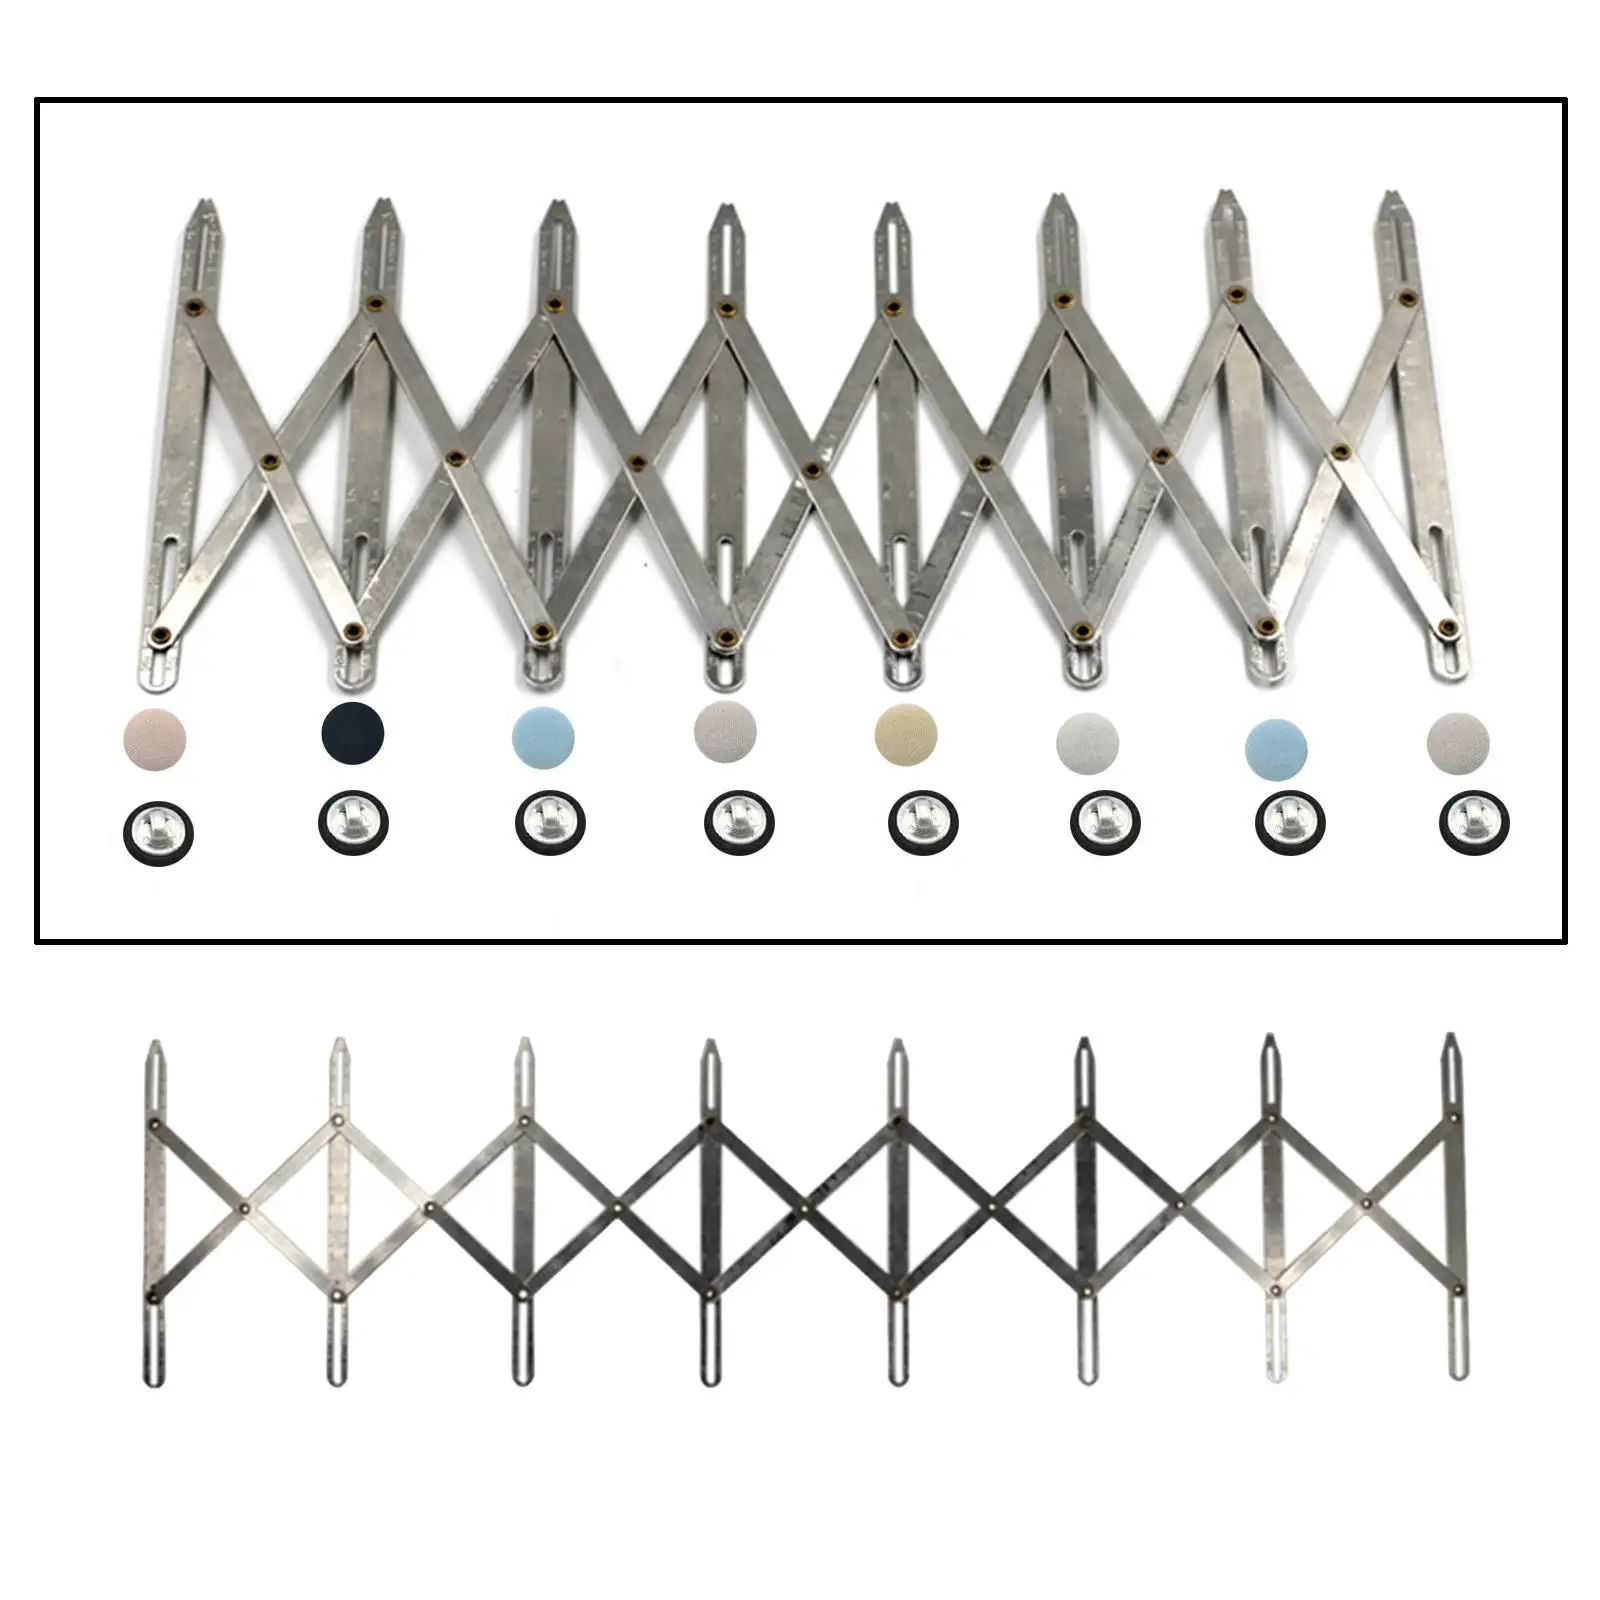 Guide Rule Expanding Aluminum Buttonhole Spacer Sewing Gauge for Window Curtain Drapery Button Holes Adults Dressmaker